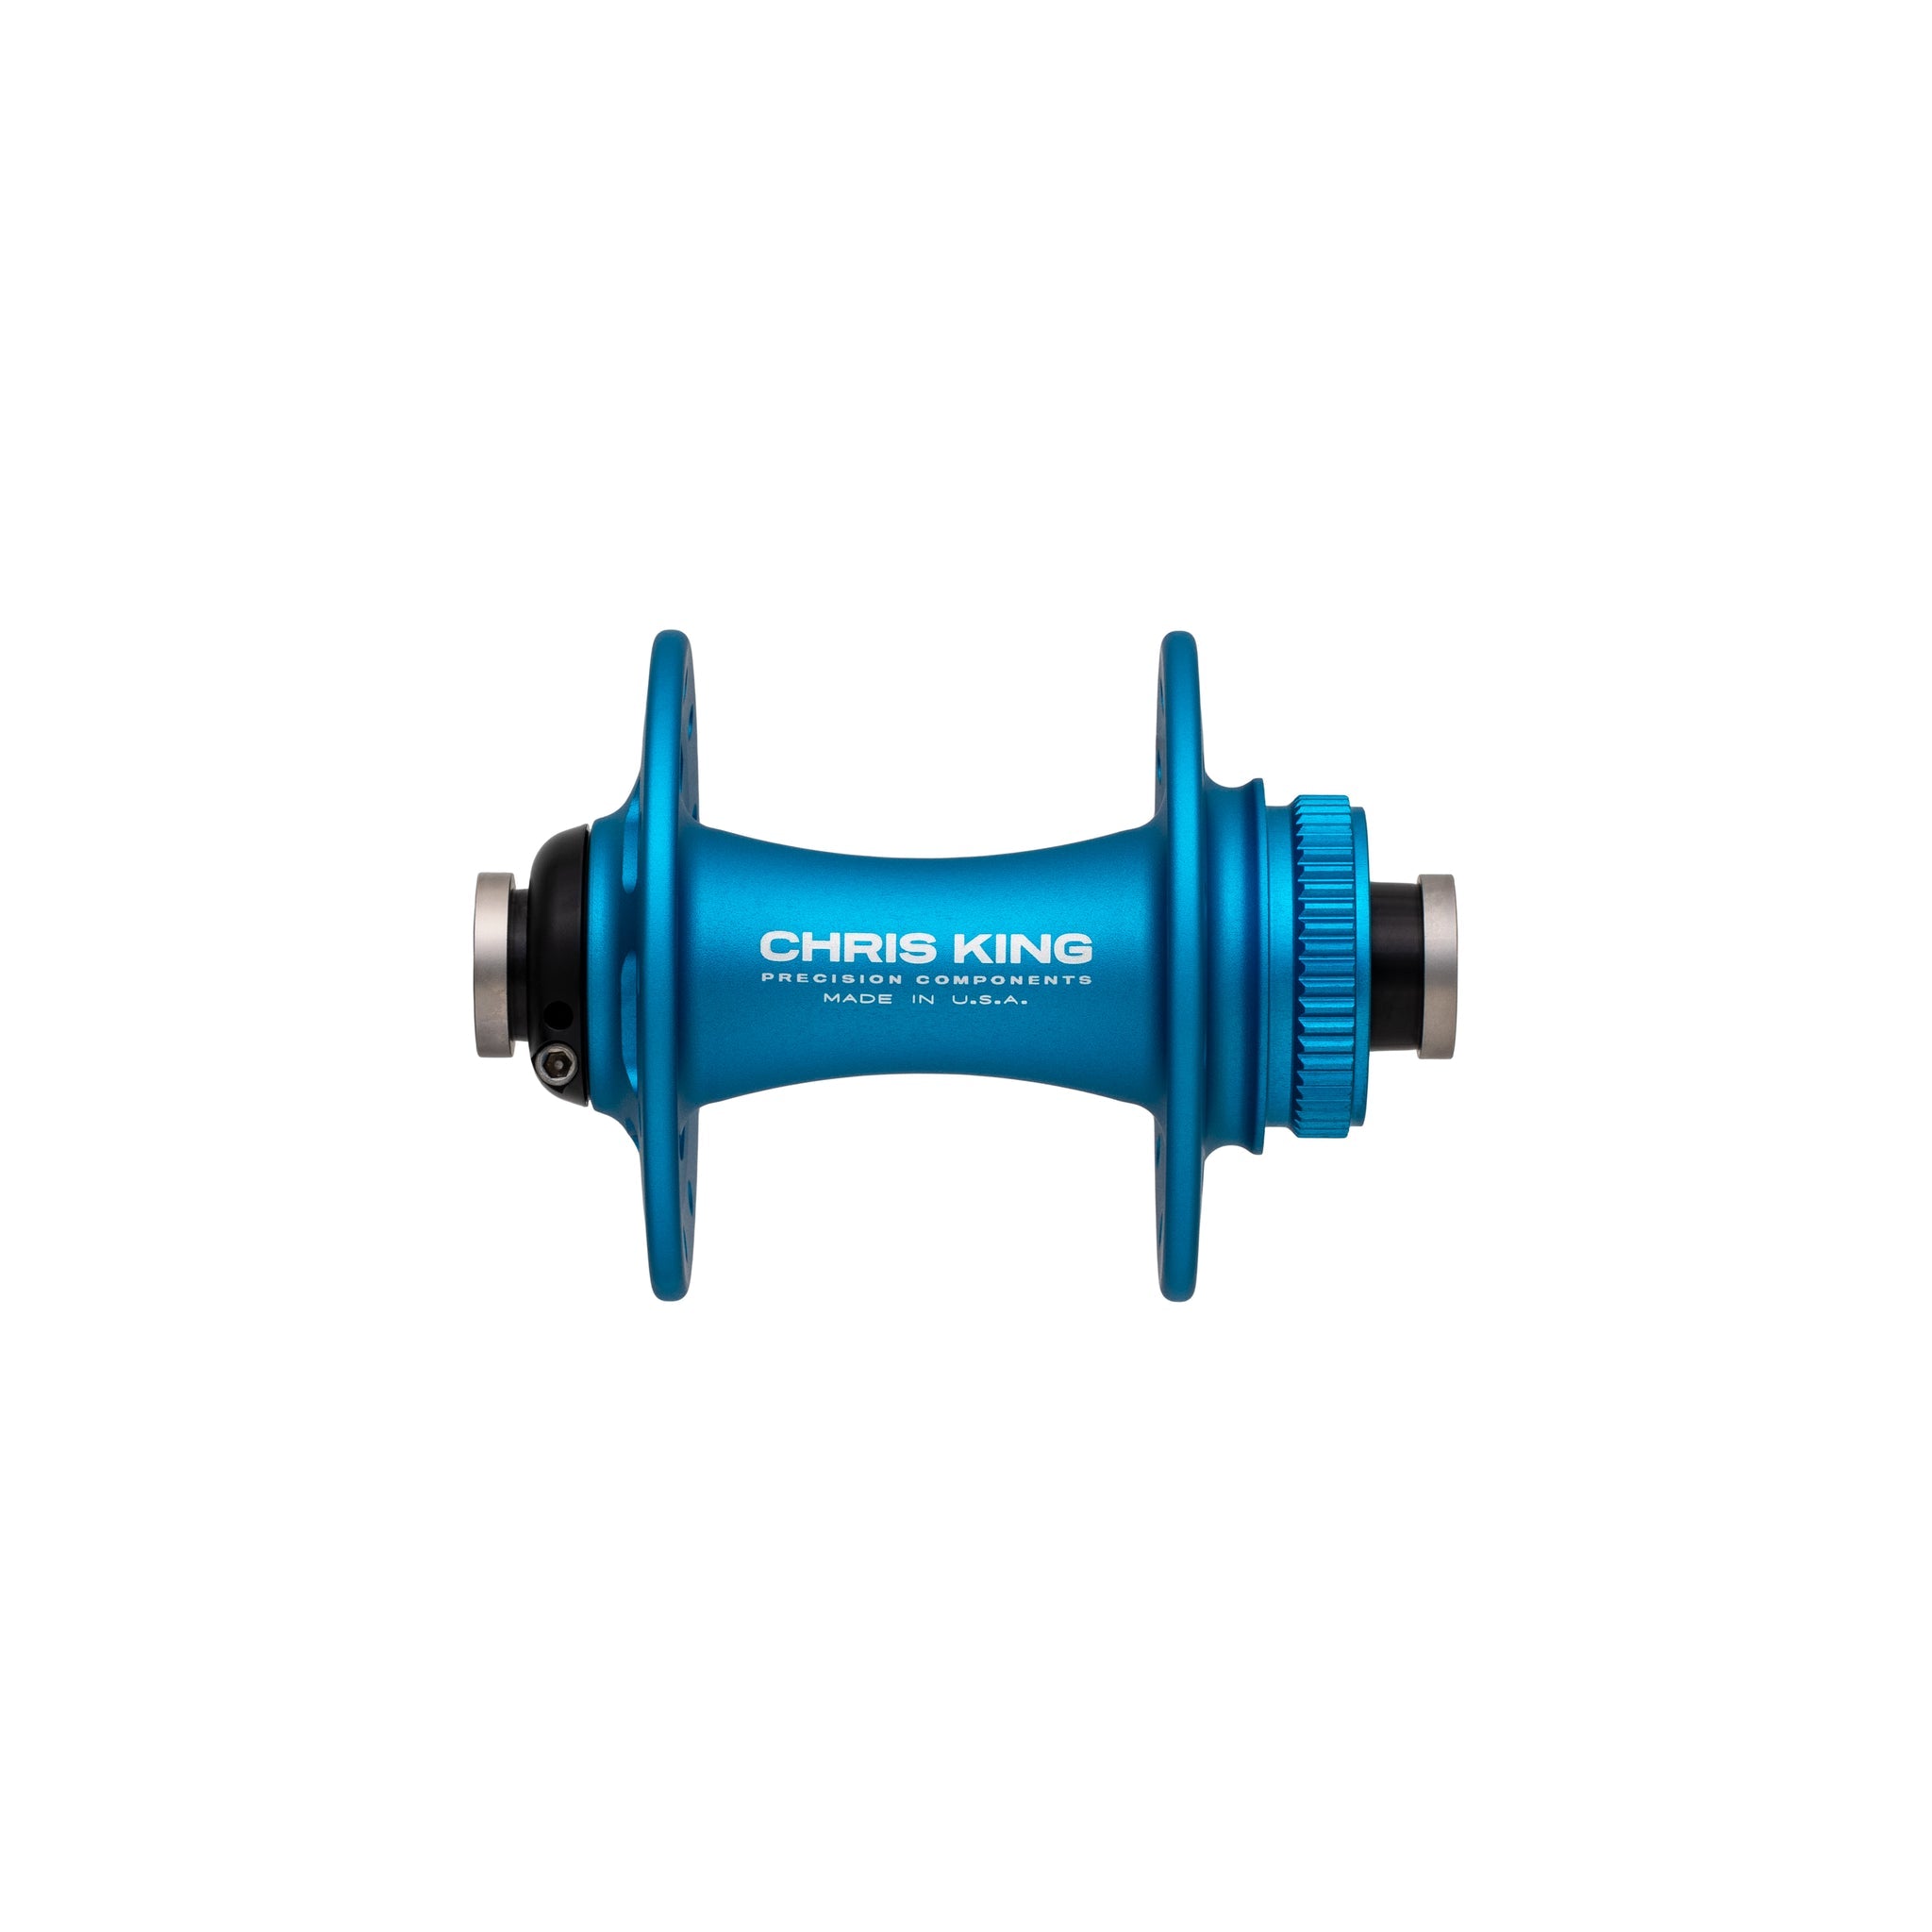 Chris king r4d front hub in matte turquoise